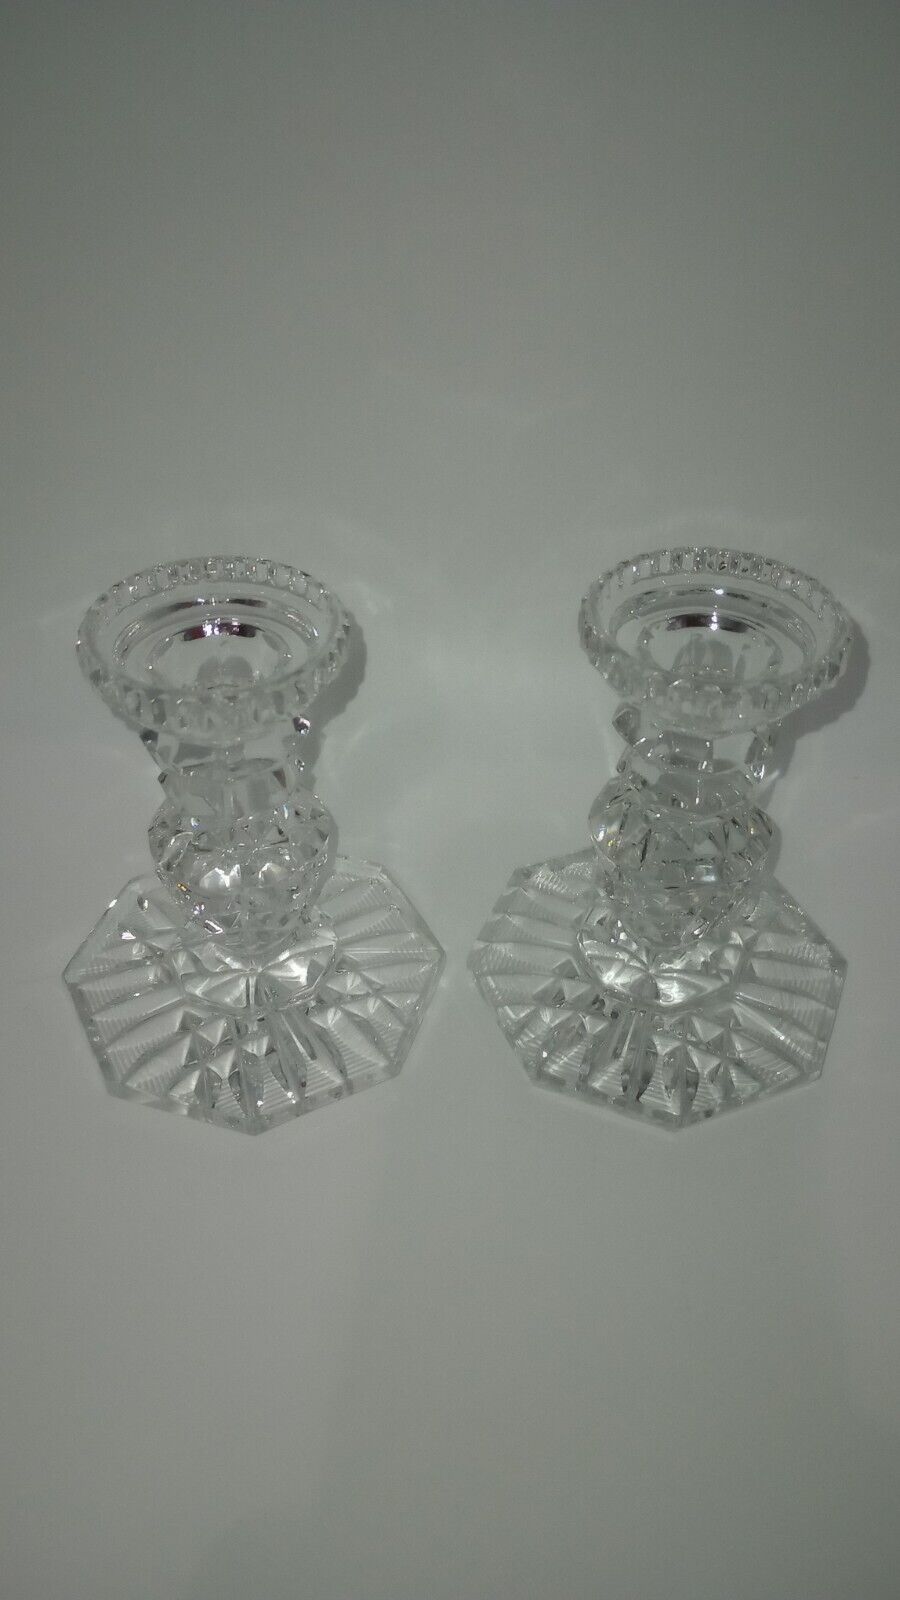 A Pair Of Vintage Cut Crystal Star Design Candle Holders 